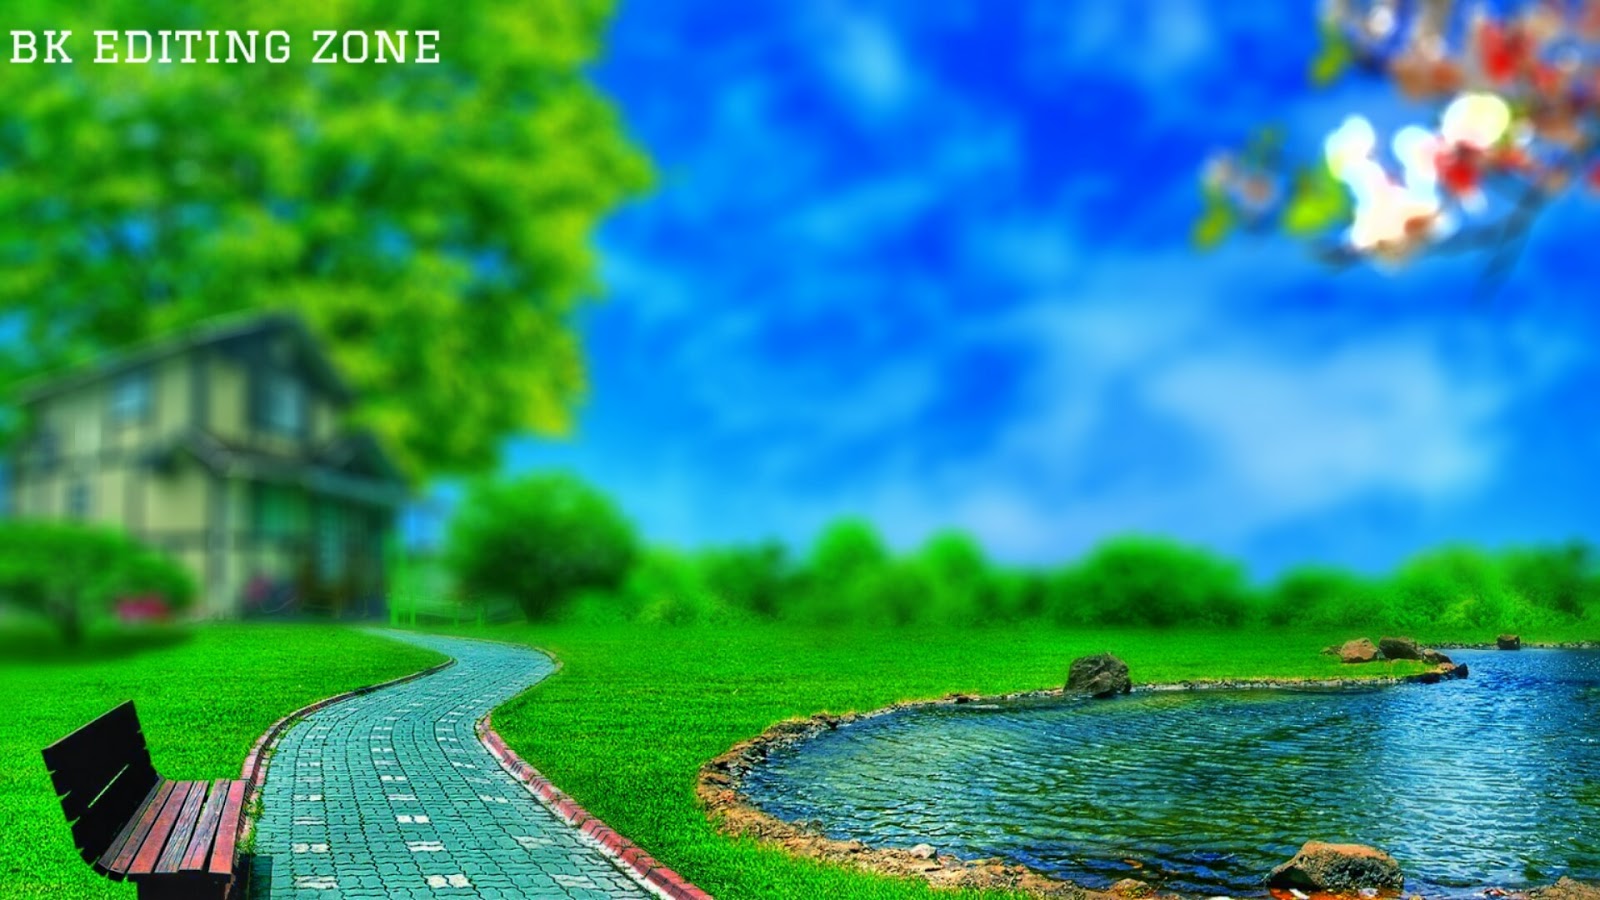 New Bk Edit Hd Background Bk Editing Zone - Background For Photo Editing Hd  - 1600x900 Wallpaper 